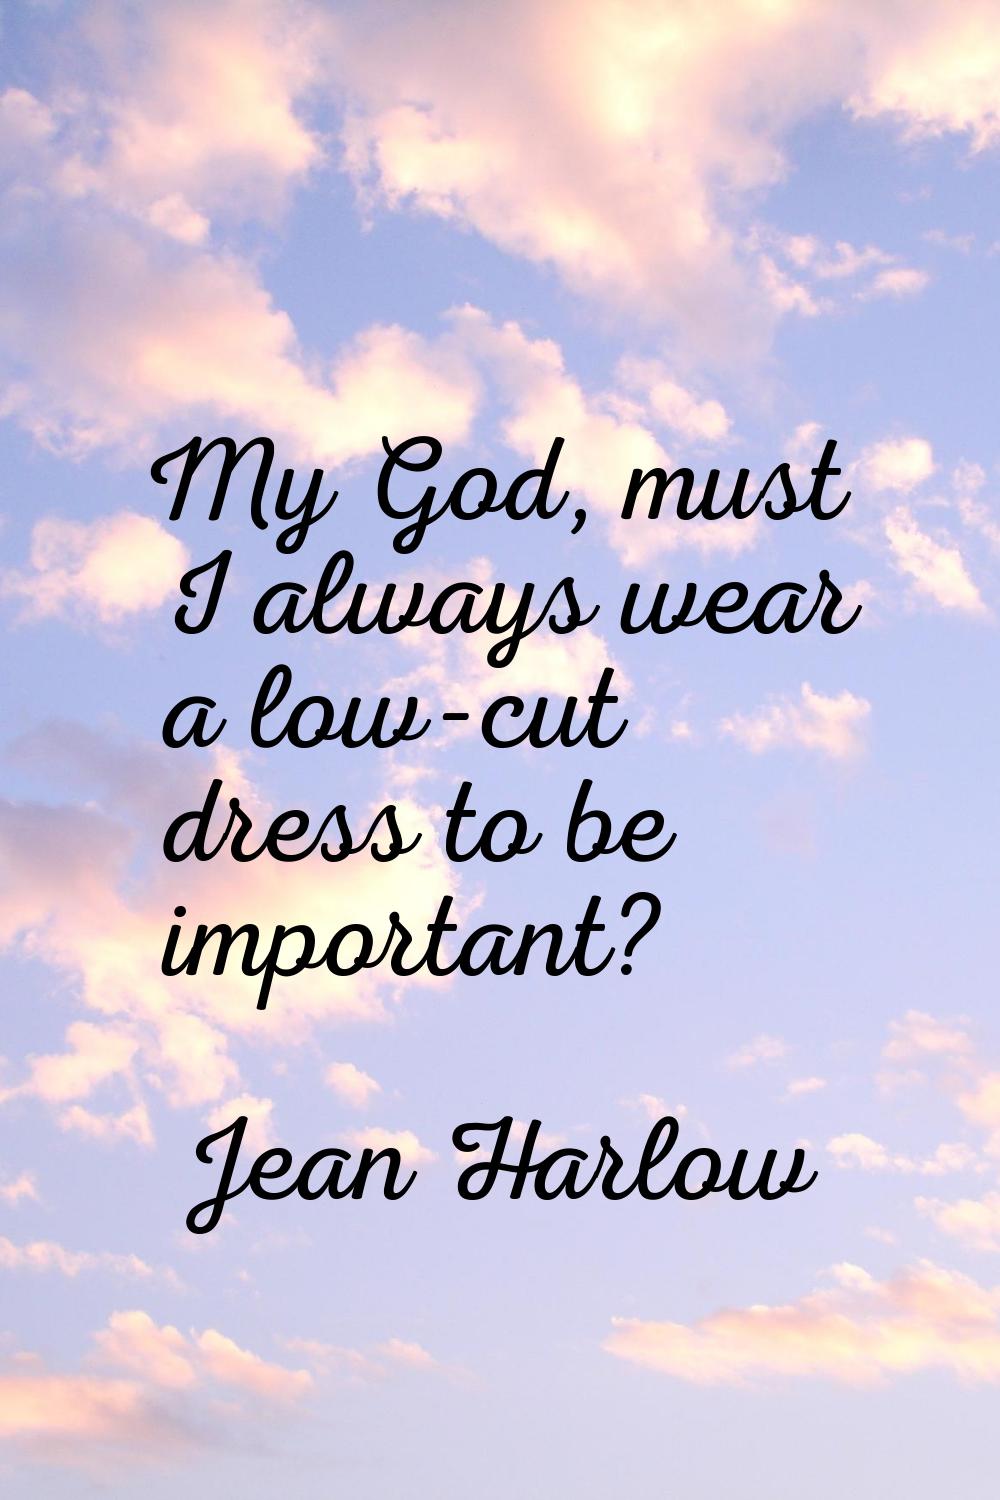 My God, must I always wear a low-cut dress to be important?